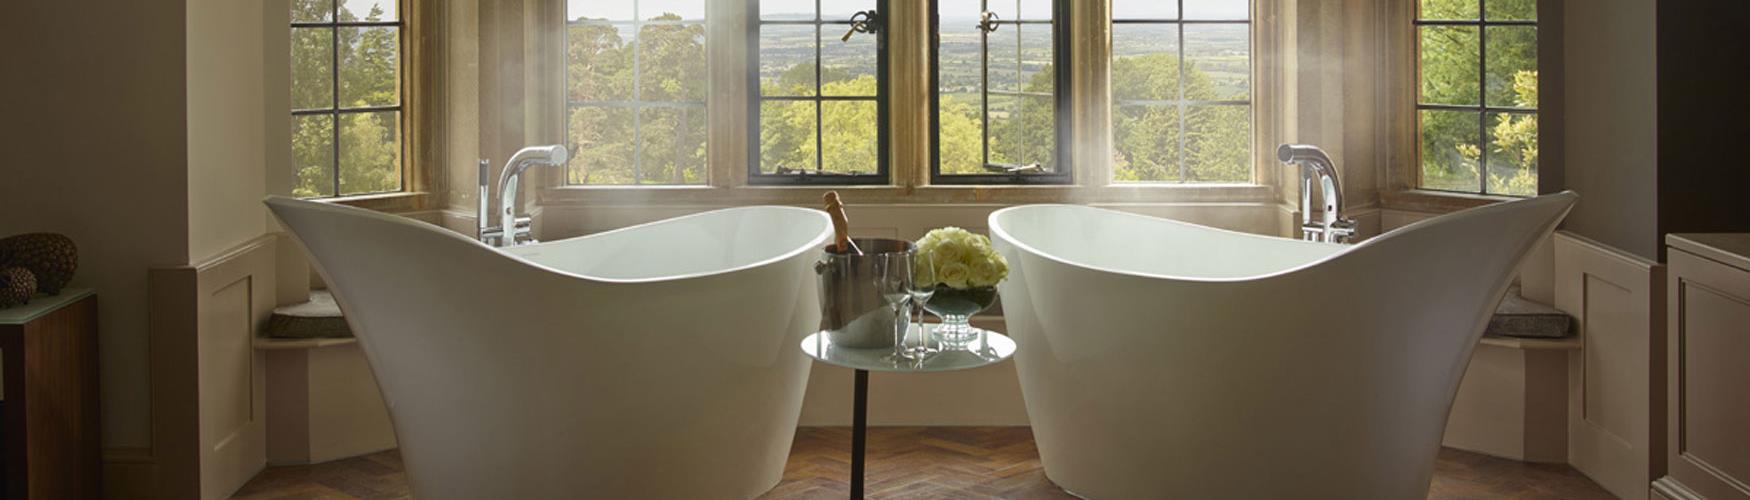 The baths in the Oak Suite at Foxhill Manor